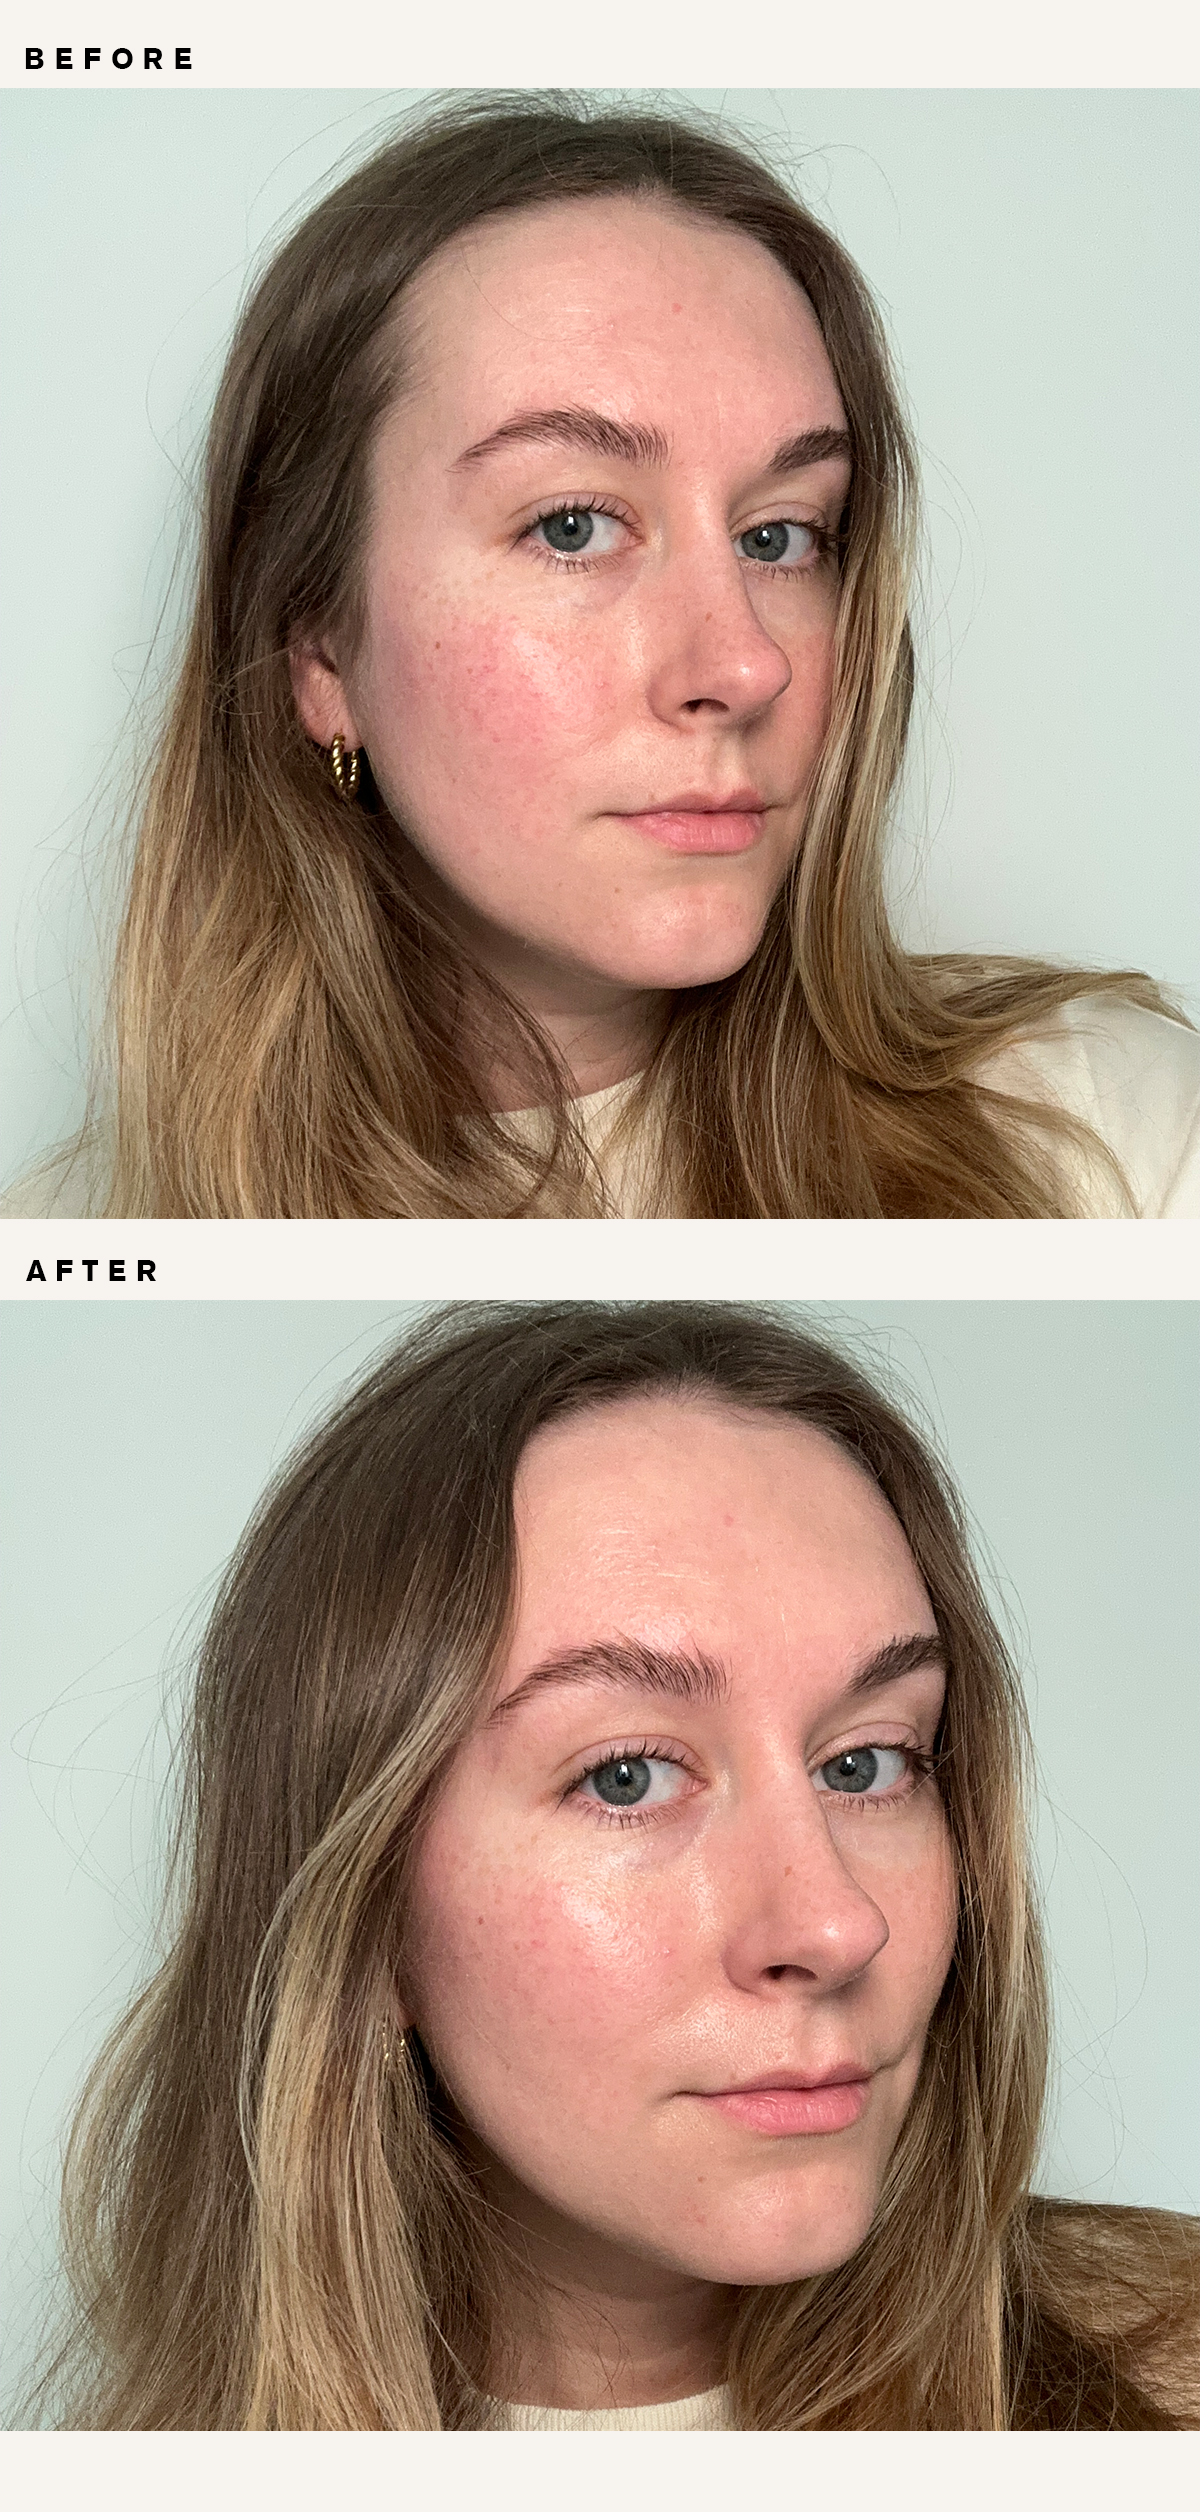 Beauty editor Kaitlyn McLintock before and after sunscreen application